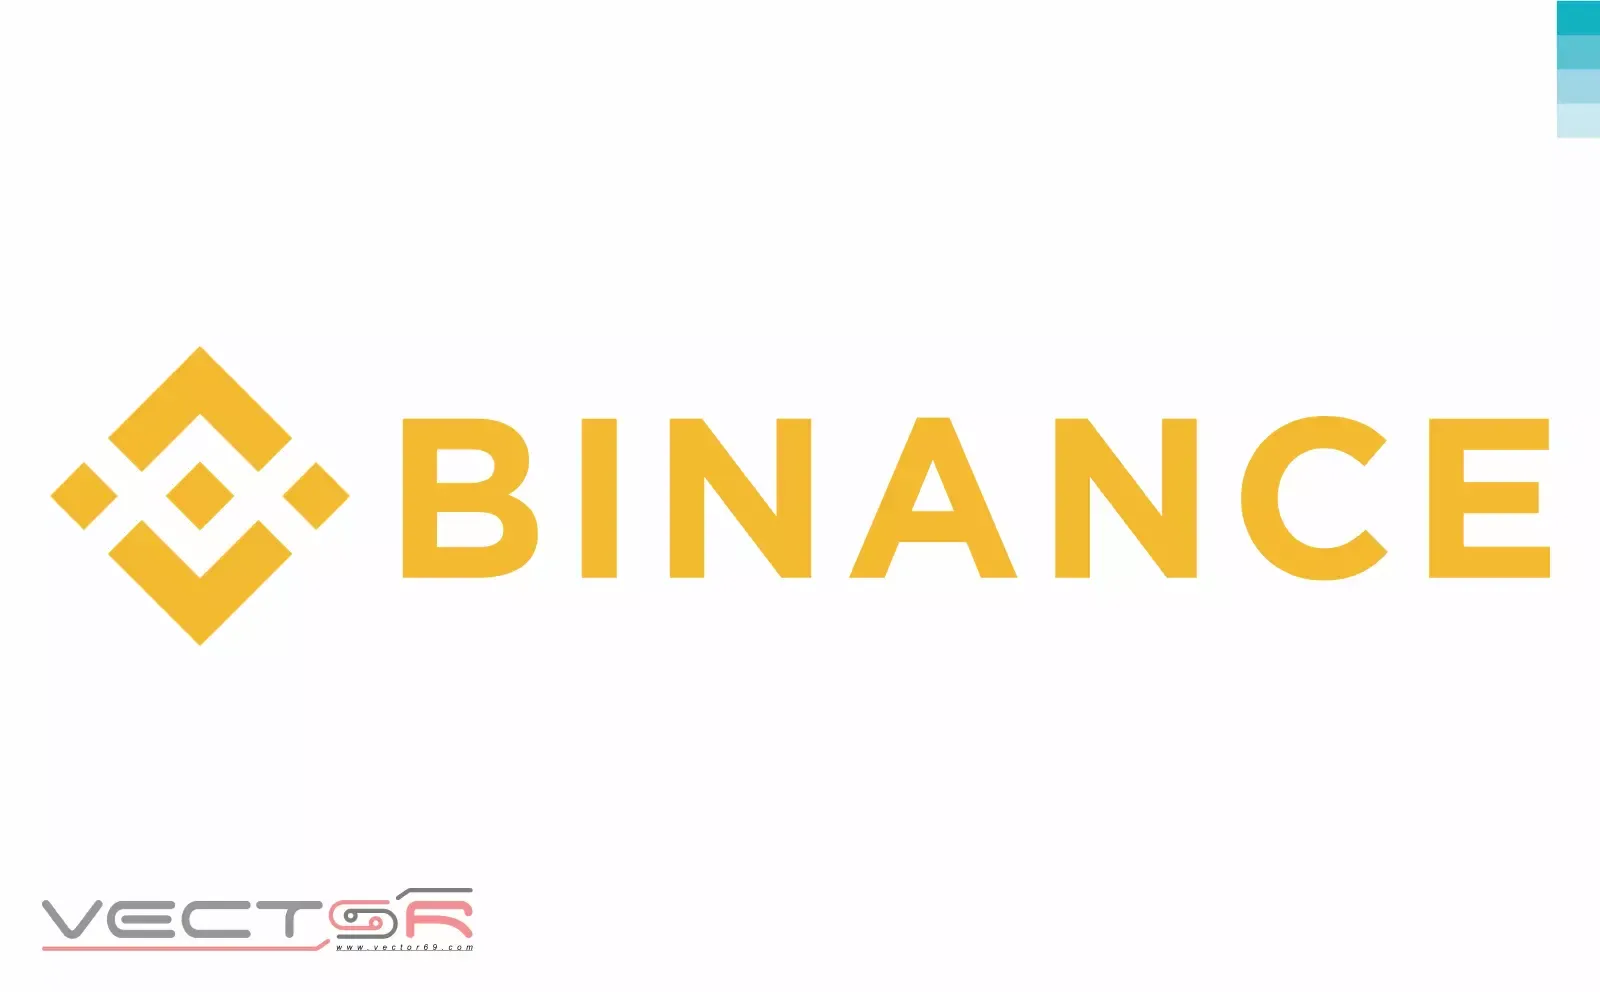 Binance (BNB) Logo - Download Vector File SVG (Scalable Vector Graphics)